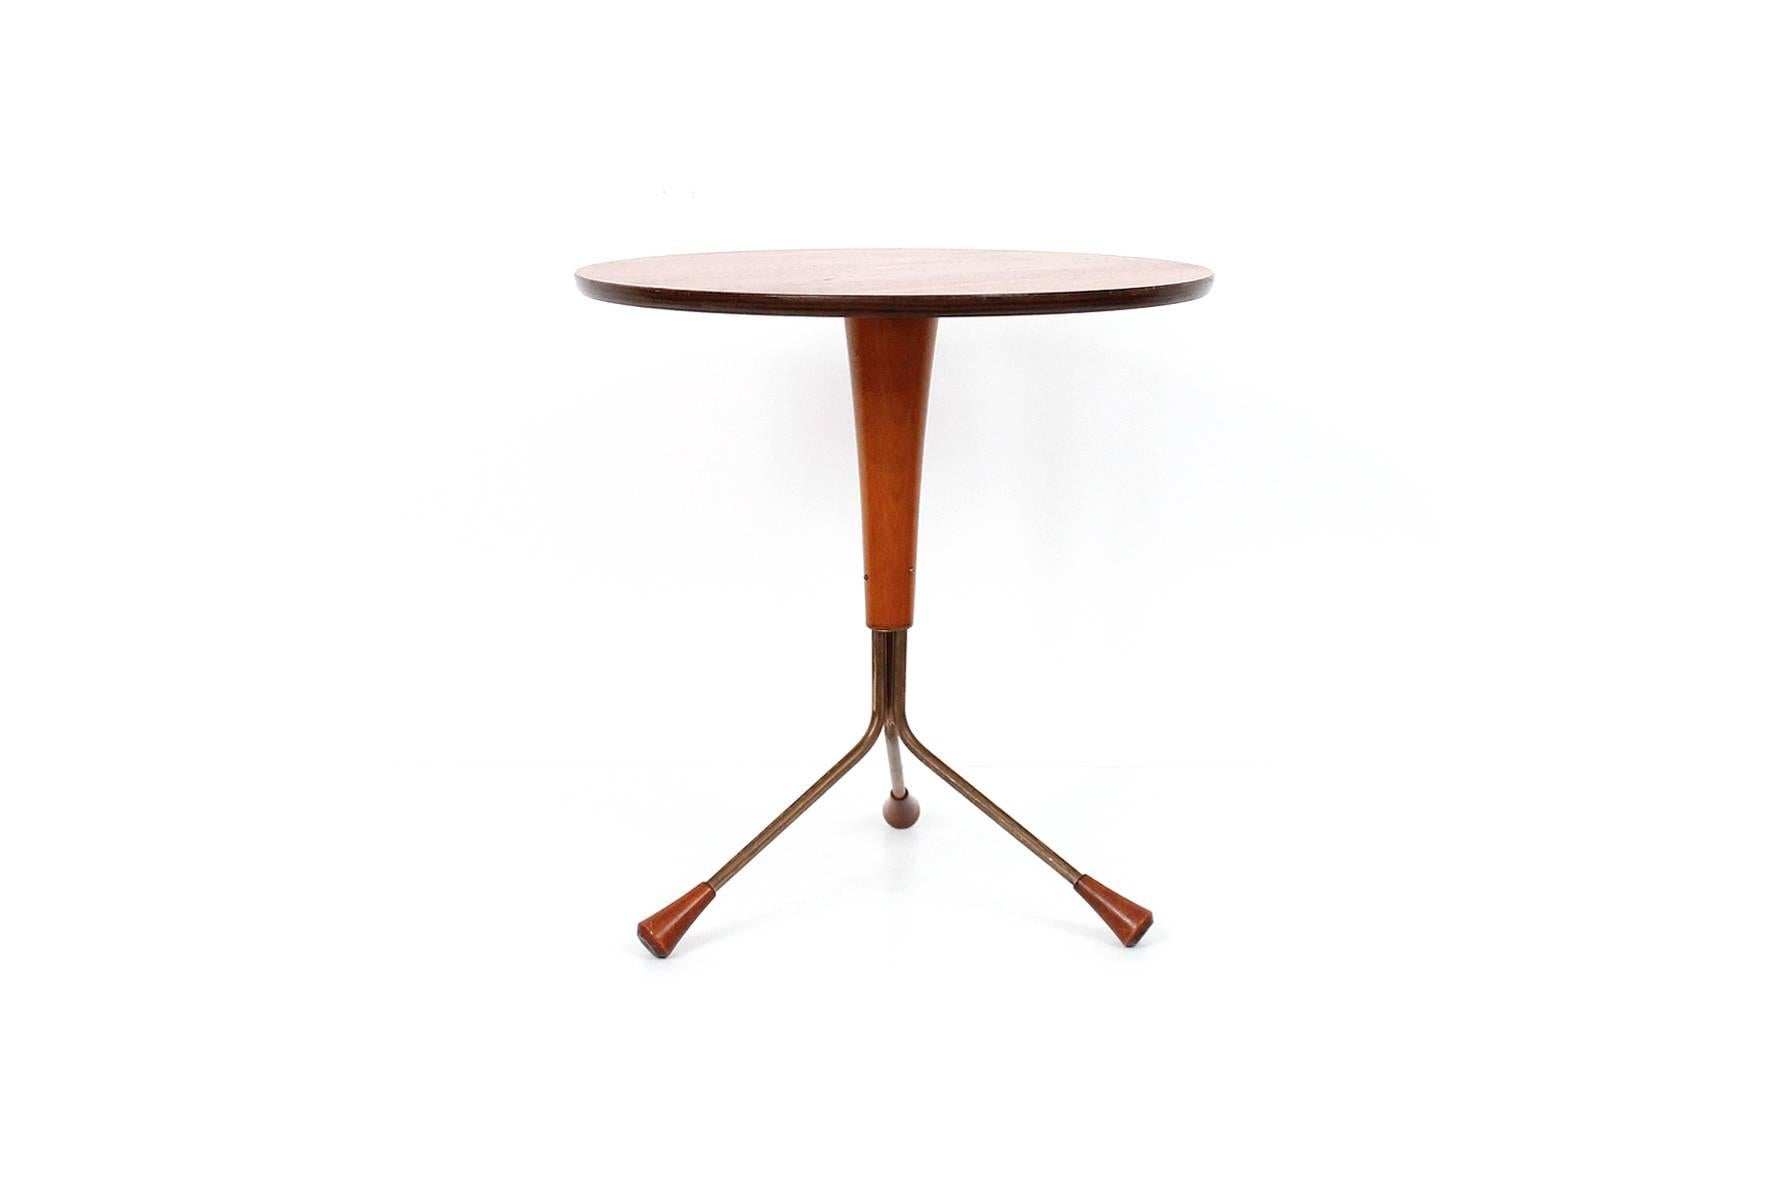 Teak tripod style side table designed by Albert Larsson for Alberts of Sweden. Teak top with brass legs and teak feet. Well-proportioned table. Branded to underside.